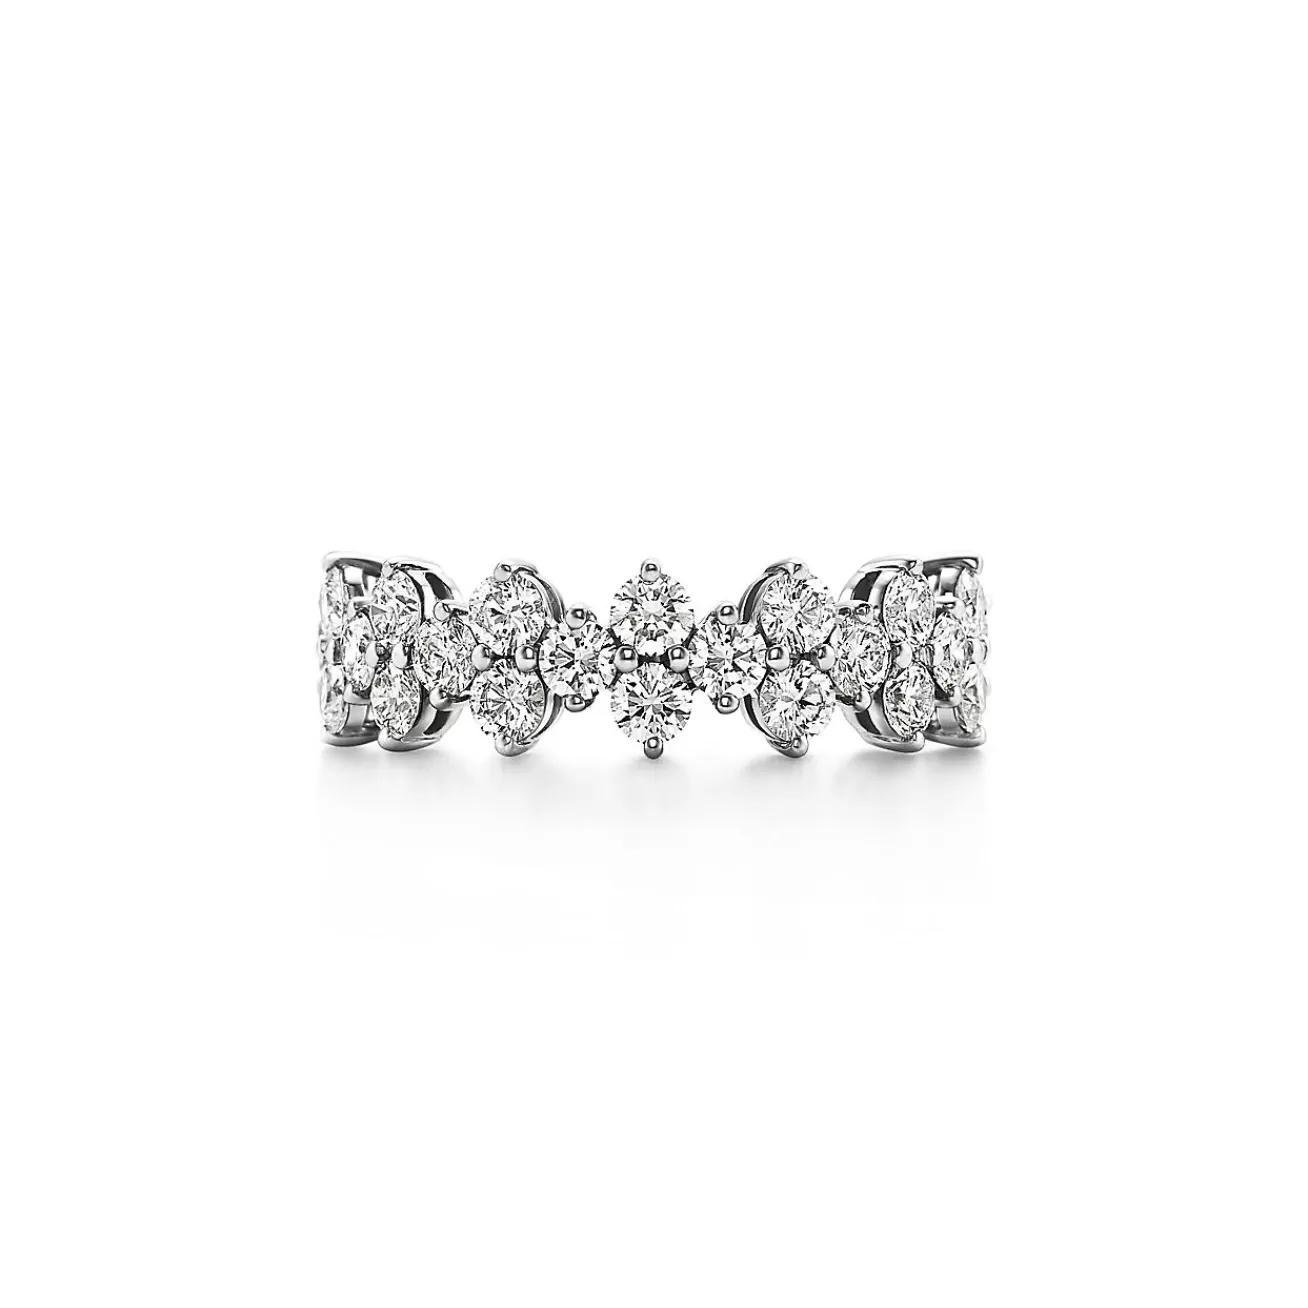 Tiffany & Co. Tiffany Aria ring of diamonds in platinum. | ^Women Rings | Stacking Rings